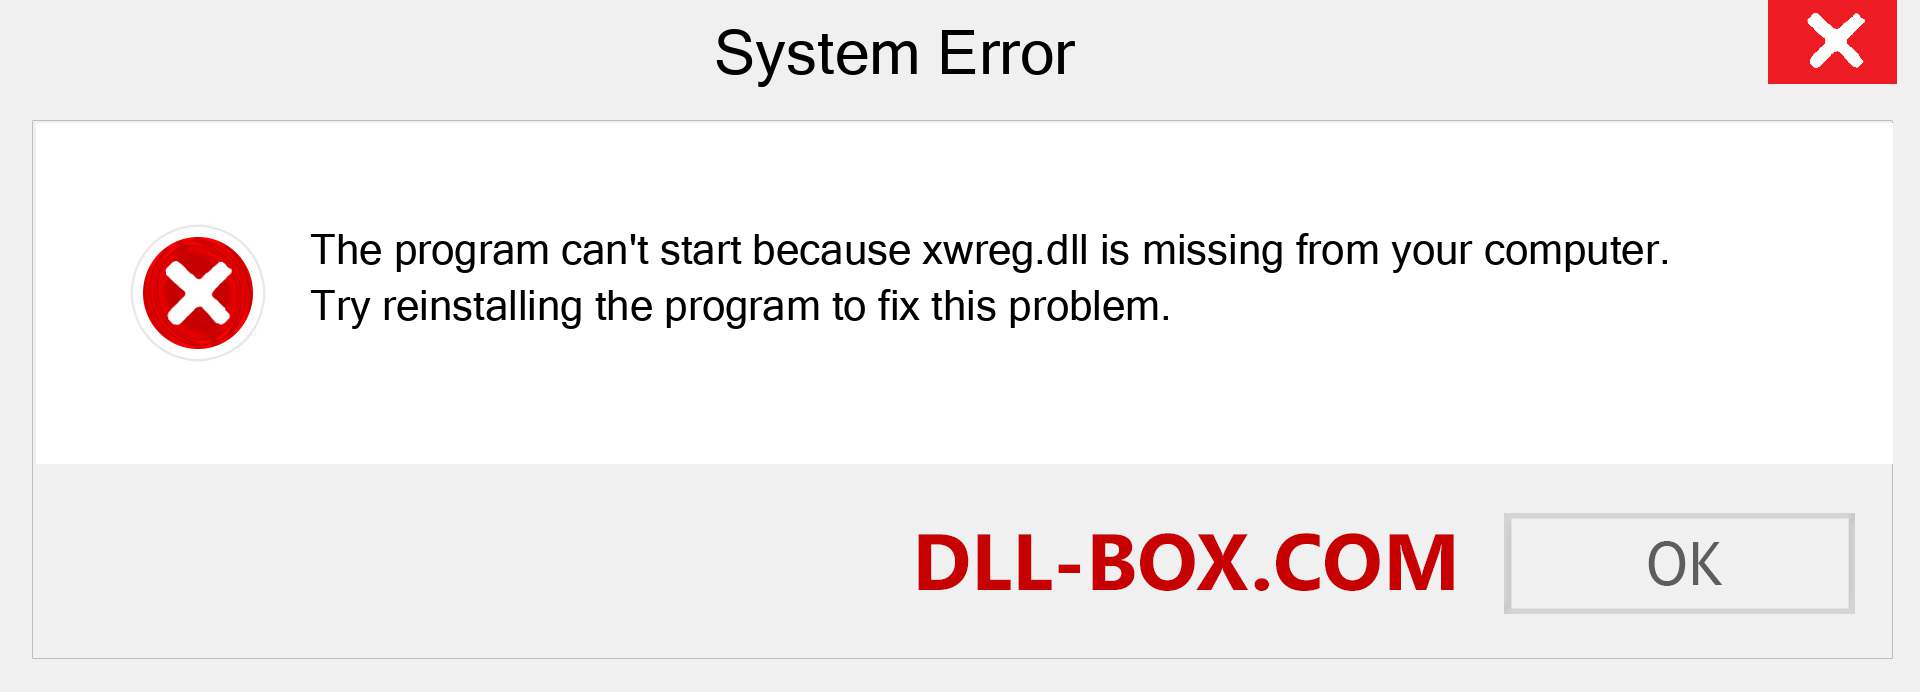  xwreg.dll file is missing?. Download for Windows 7, 8, 10 - Fix  xwreg dll Missing Error on Windows, photos, images